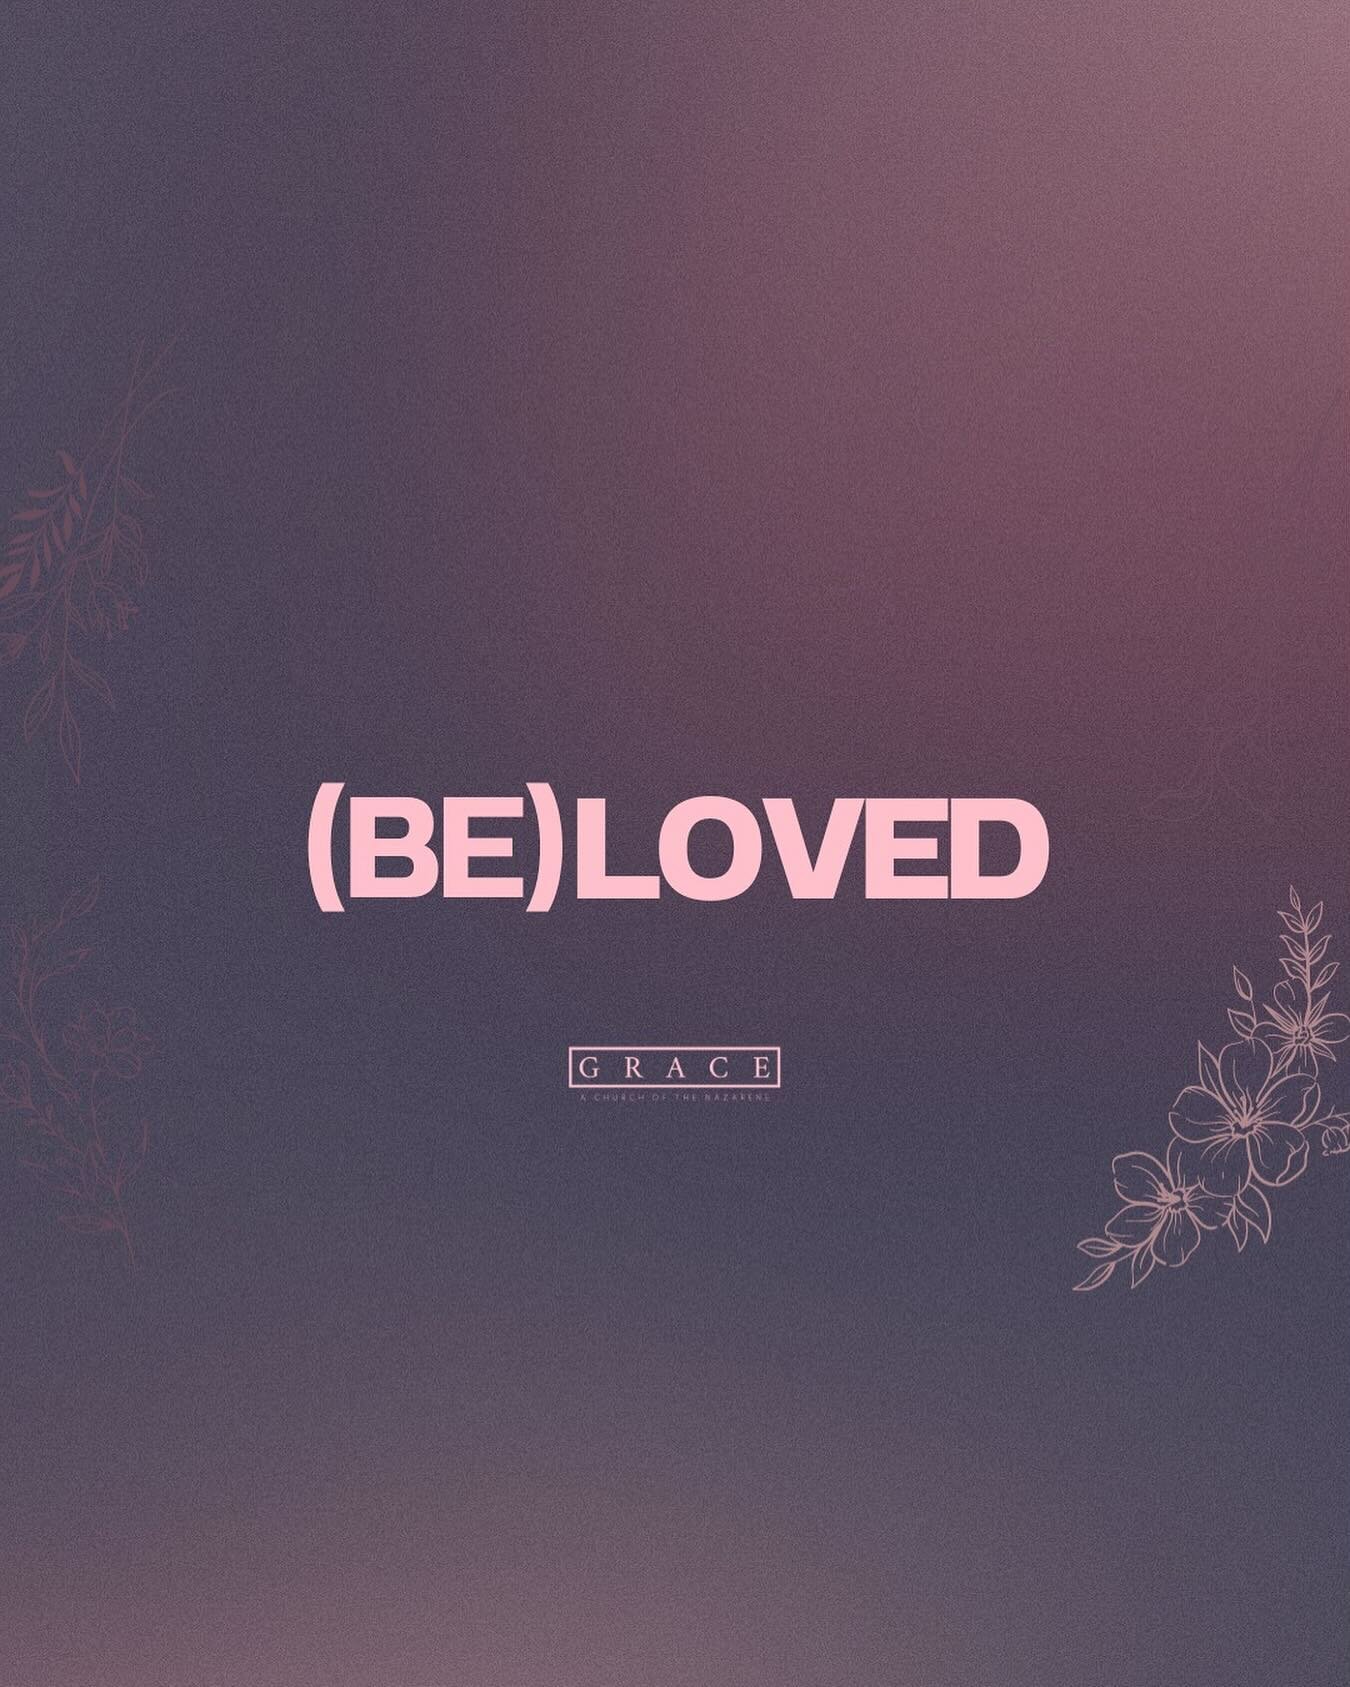 We&rsquo;d love for you to join us this Sunday at 11 am for our new series, BELOVED!